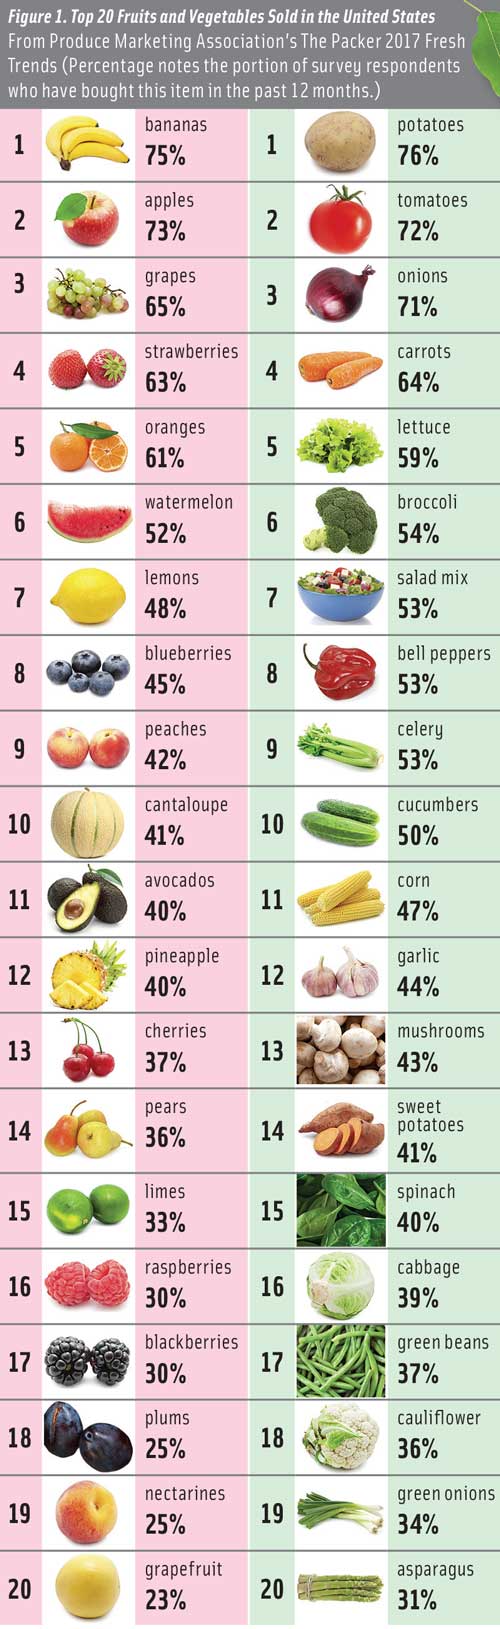 Figure 1. Top 20 Fruits and Vegetables Sold in the United States From Produce Marketing Association’s The Packer 2017 Fresh Trends (Percentage notes the portion of survey respondents  who have bought this item in the past 12 months.)